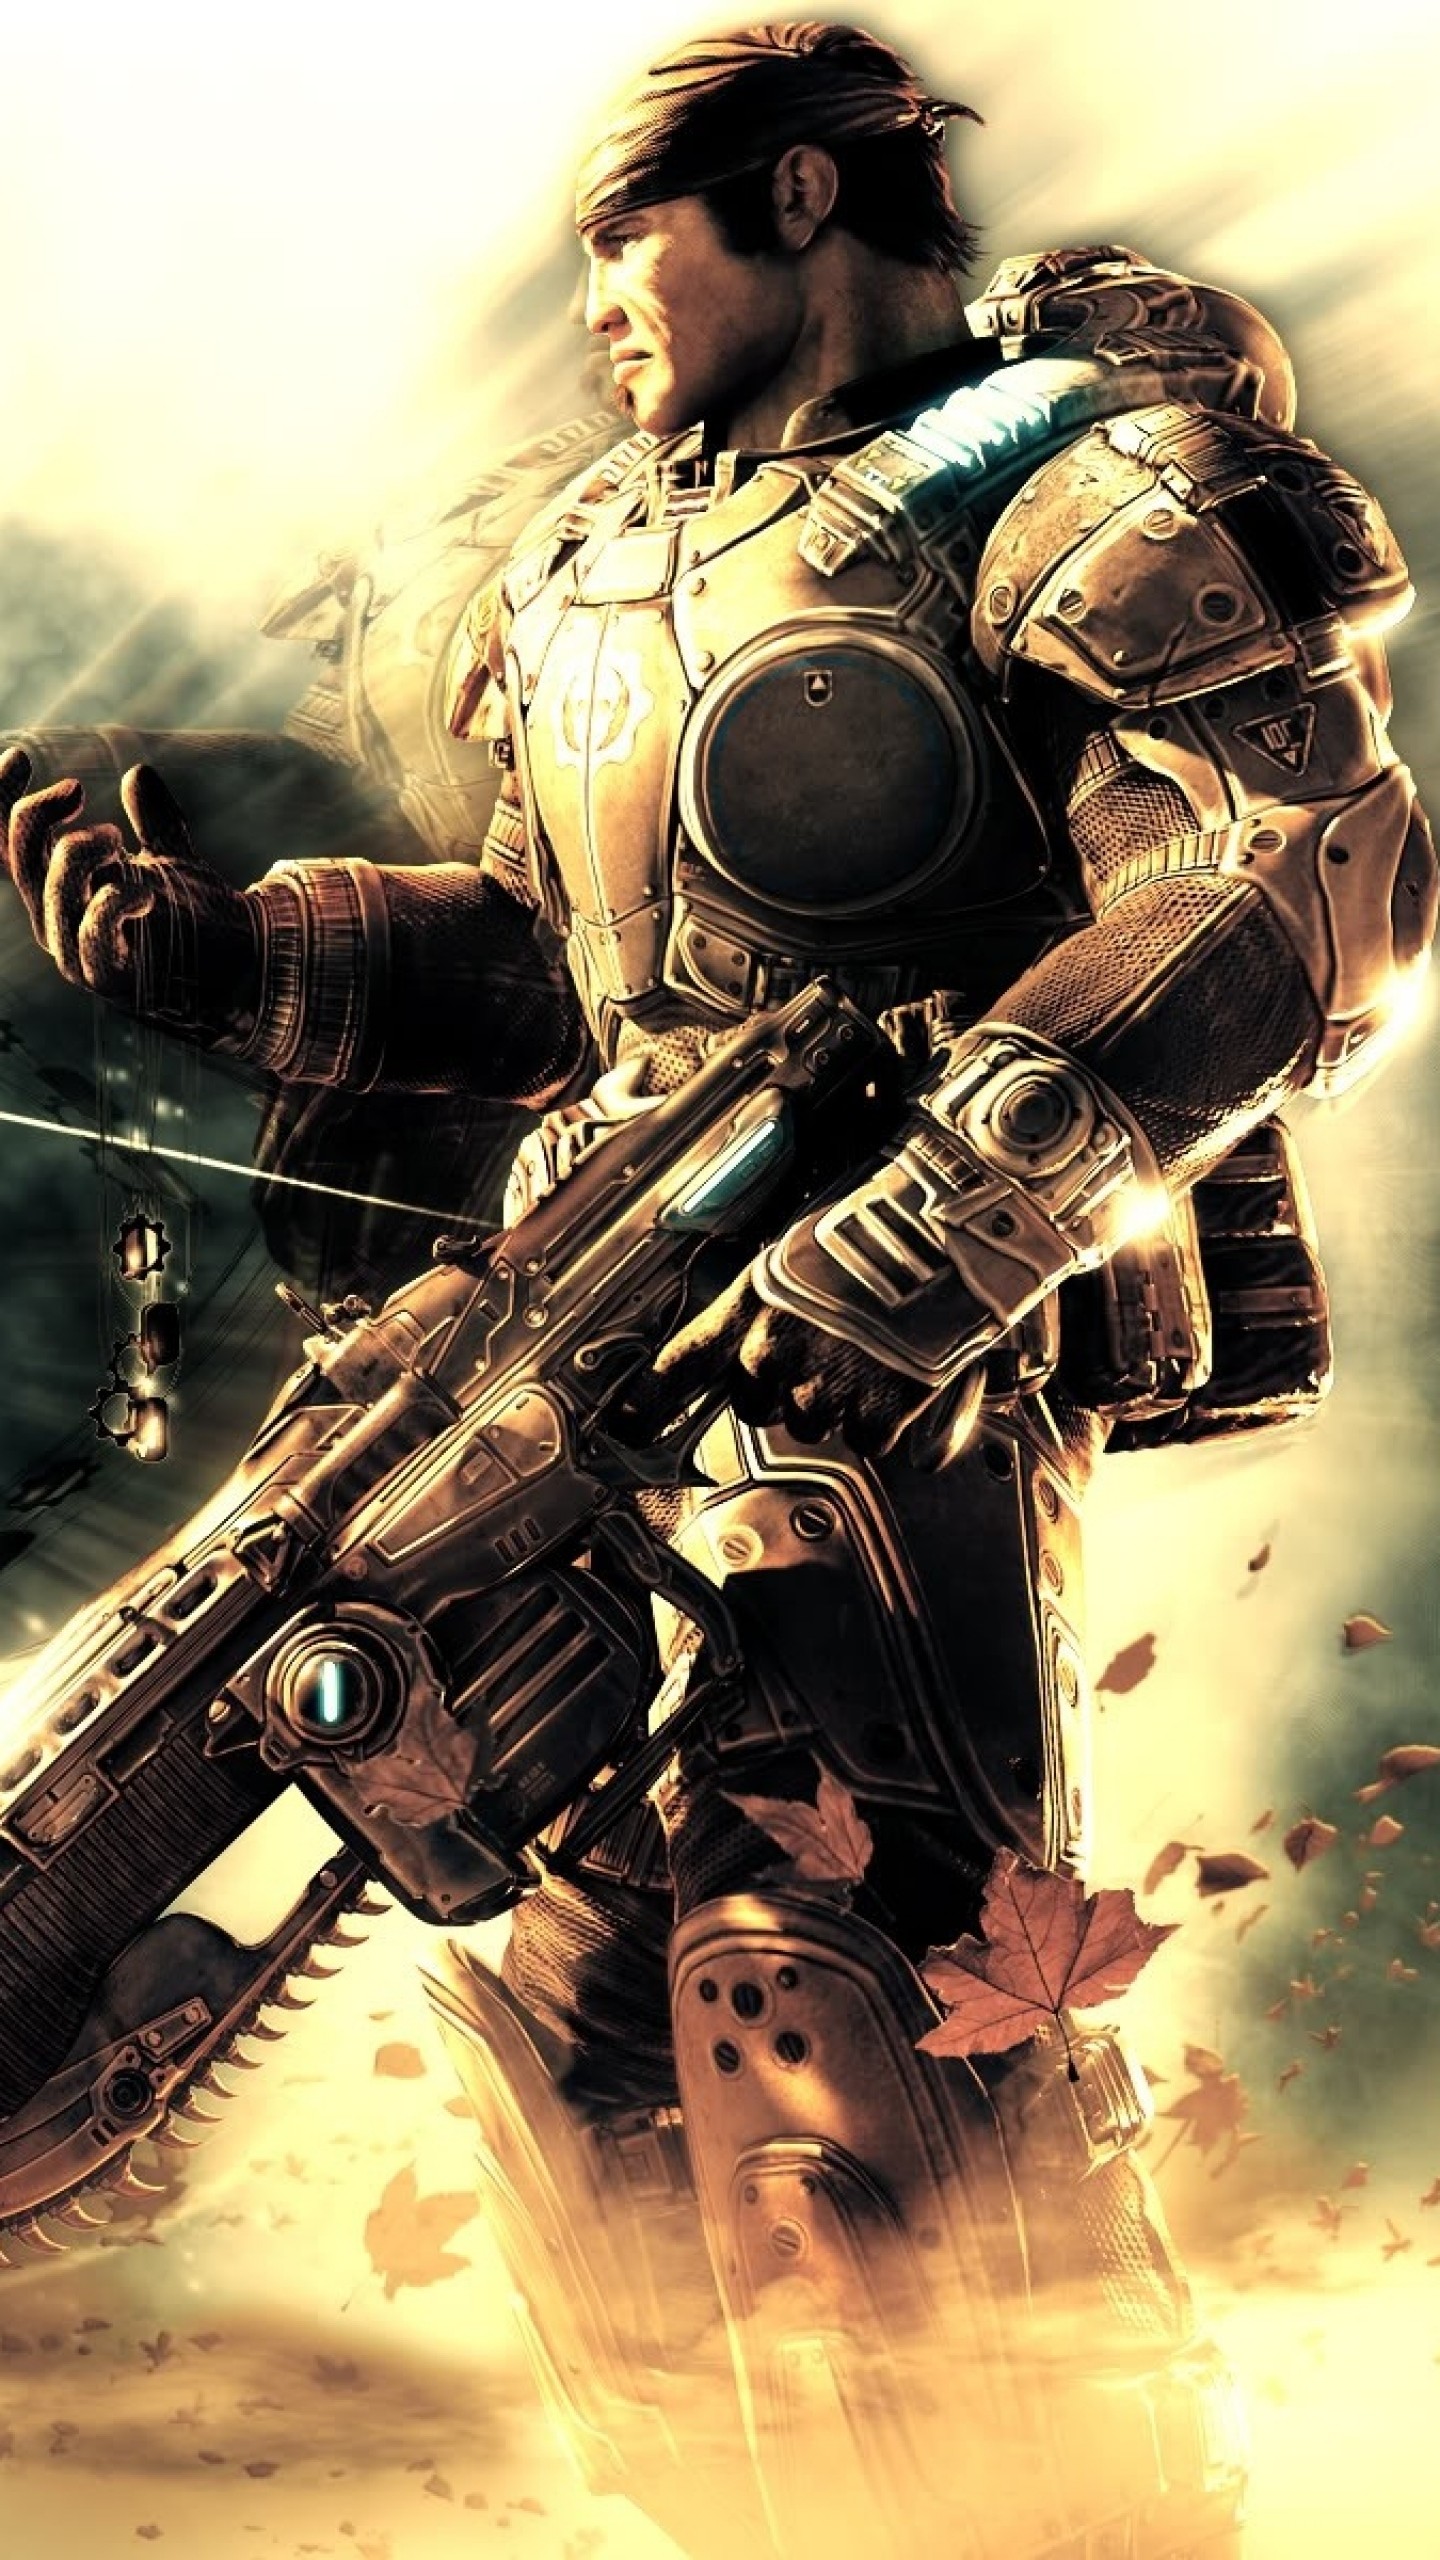 gears of war iphone wallpaper,action adventure game,shooter game,soldier,pc game,movie